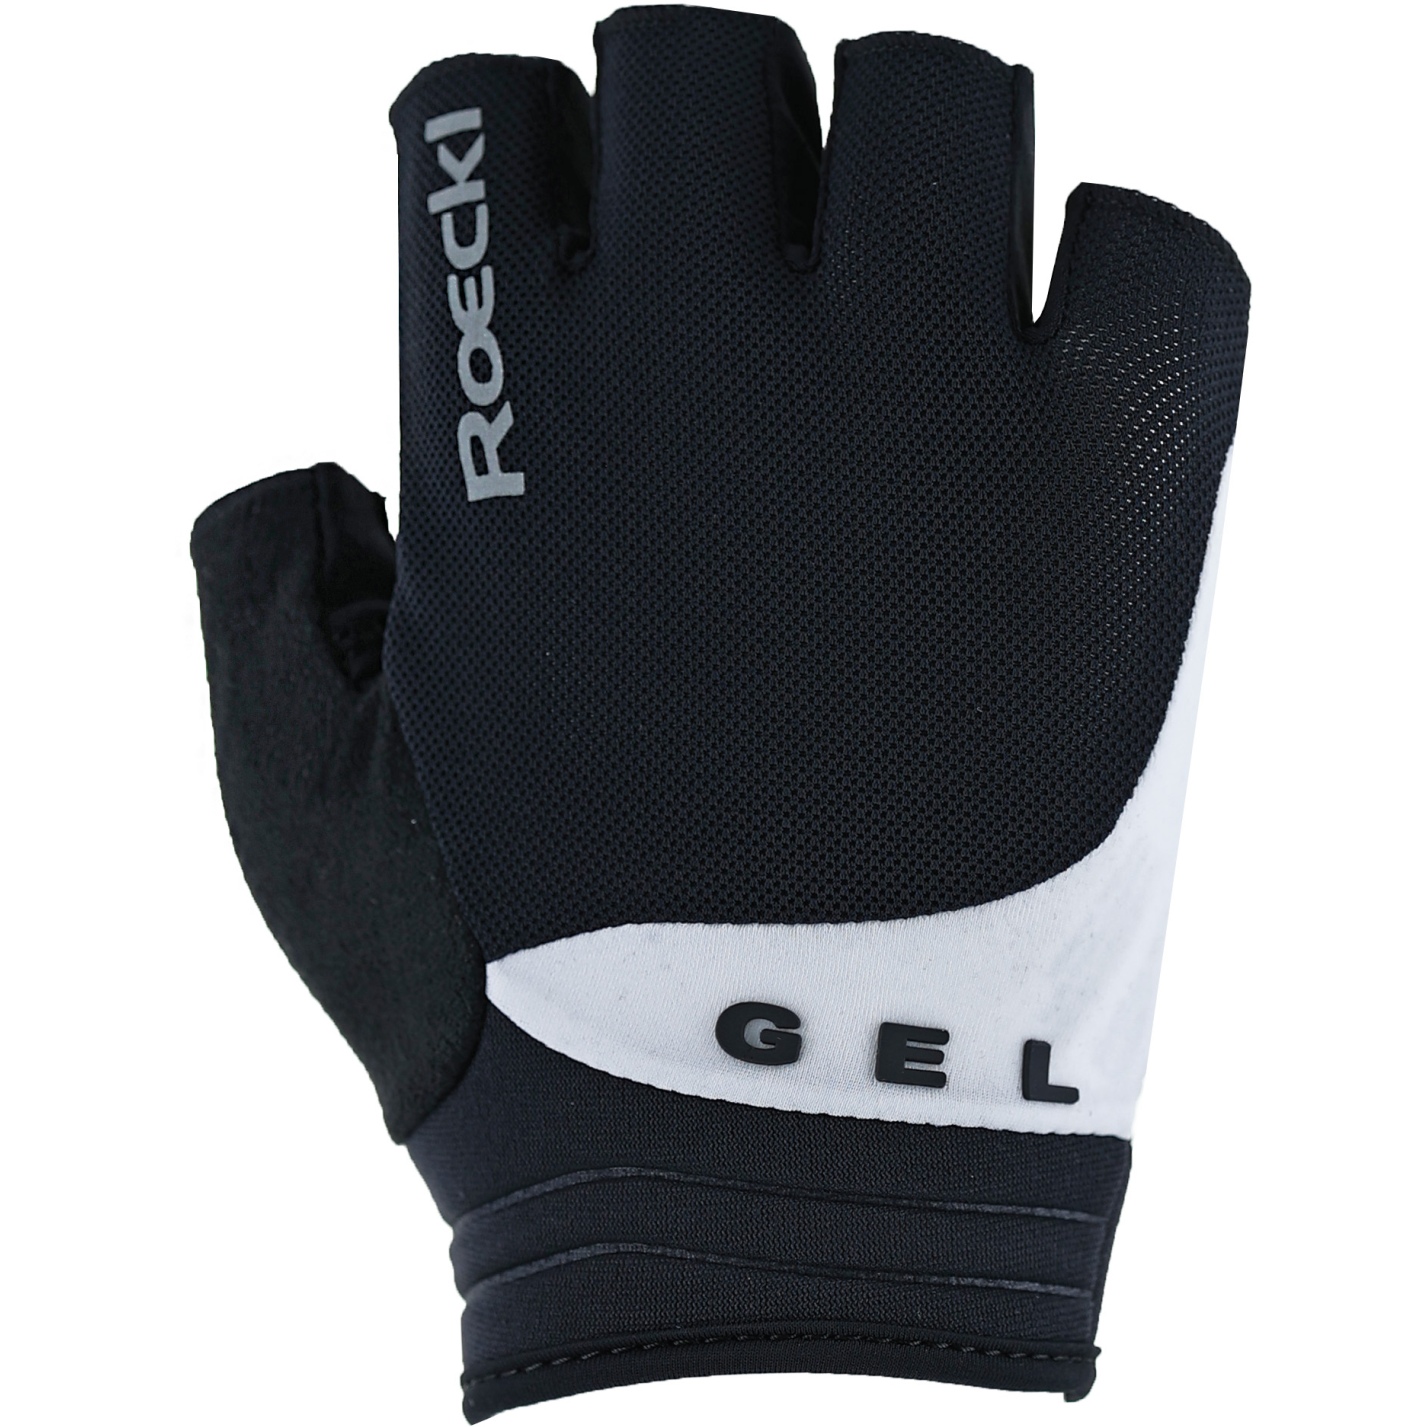 Picture of Roeckl Sports Itamos 2 Cycling Gloves - black/white 9100